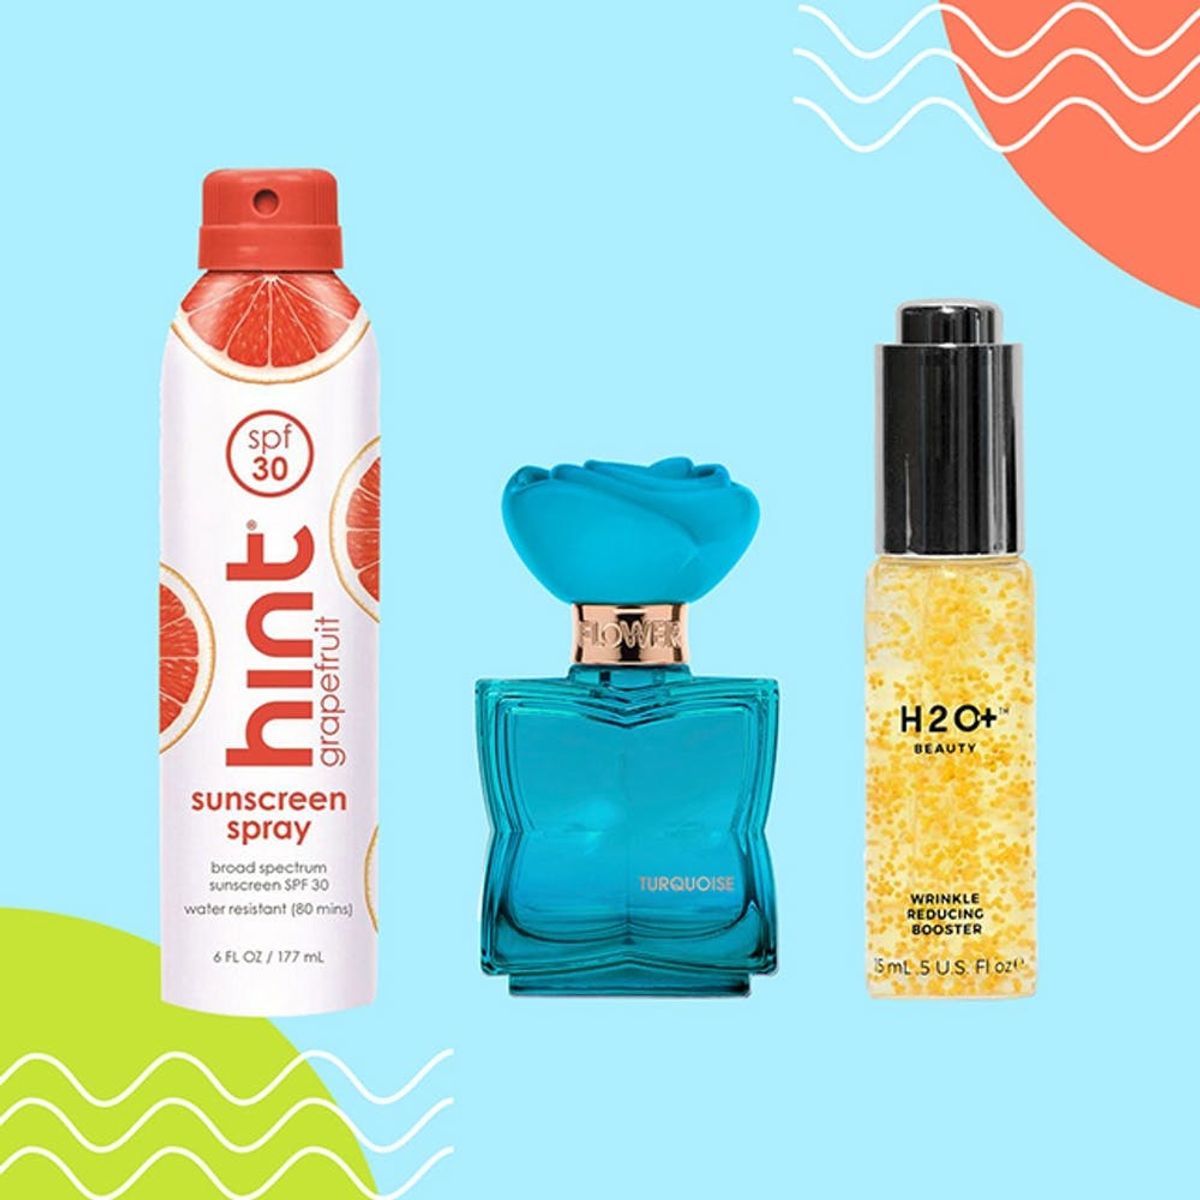 10 New Beauty Products to Scoop Up in July